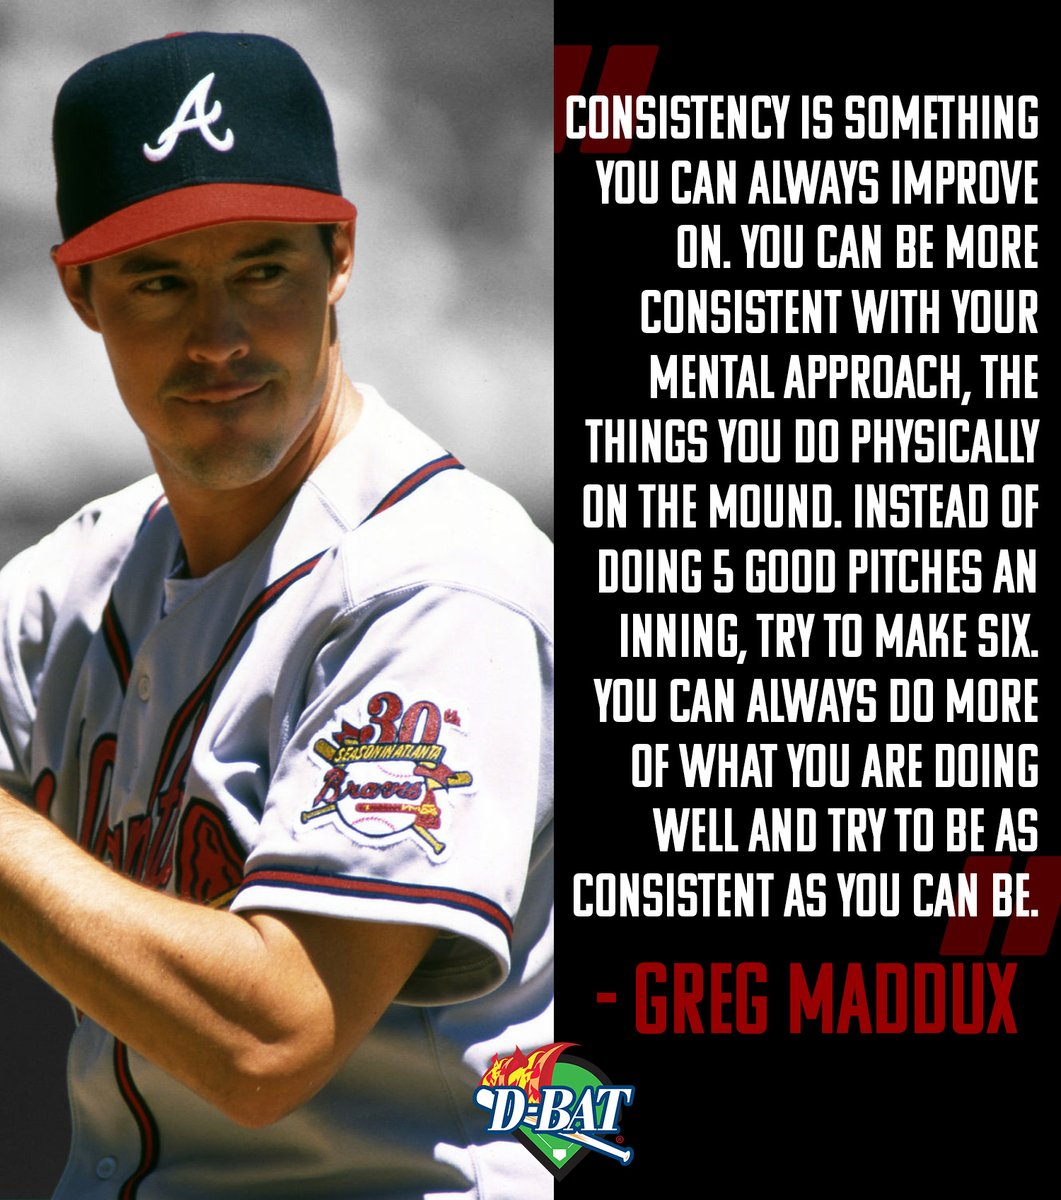 Consistency is key🔑 No one was more consistent than Greg Maddux! #betterthanyesterday #mondaymotivation